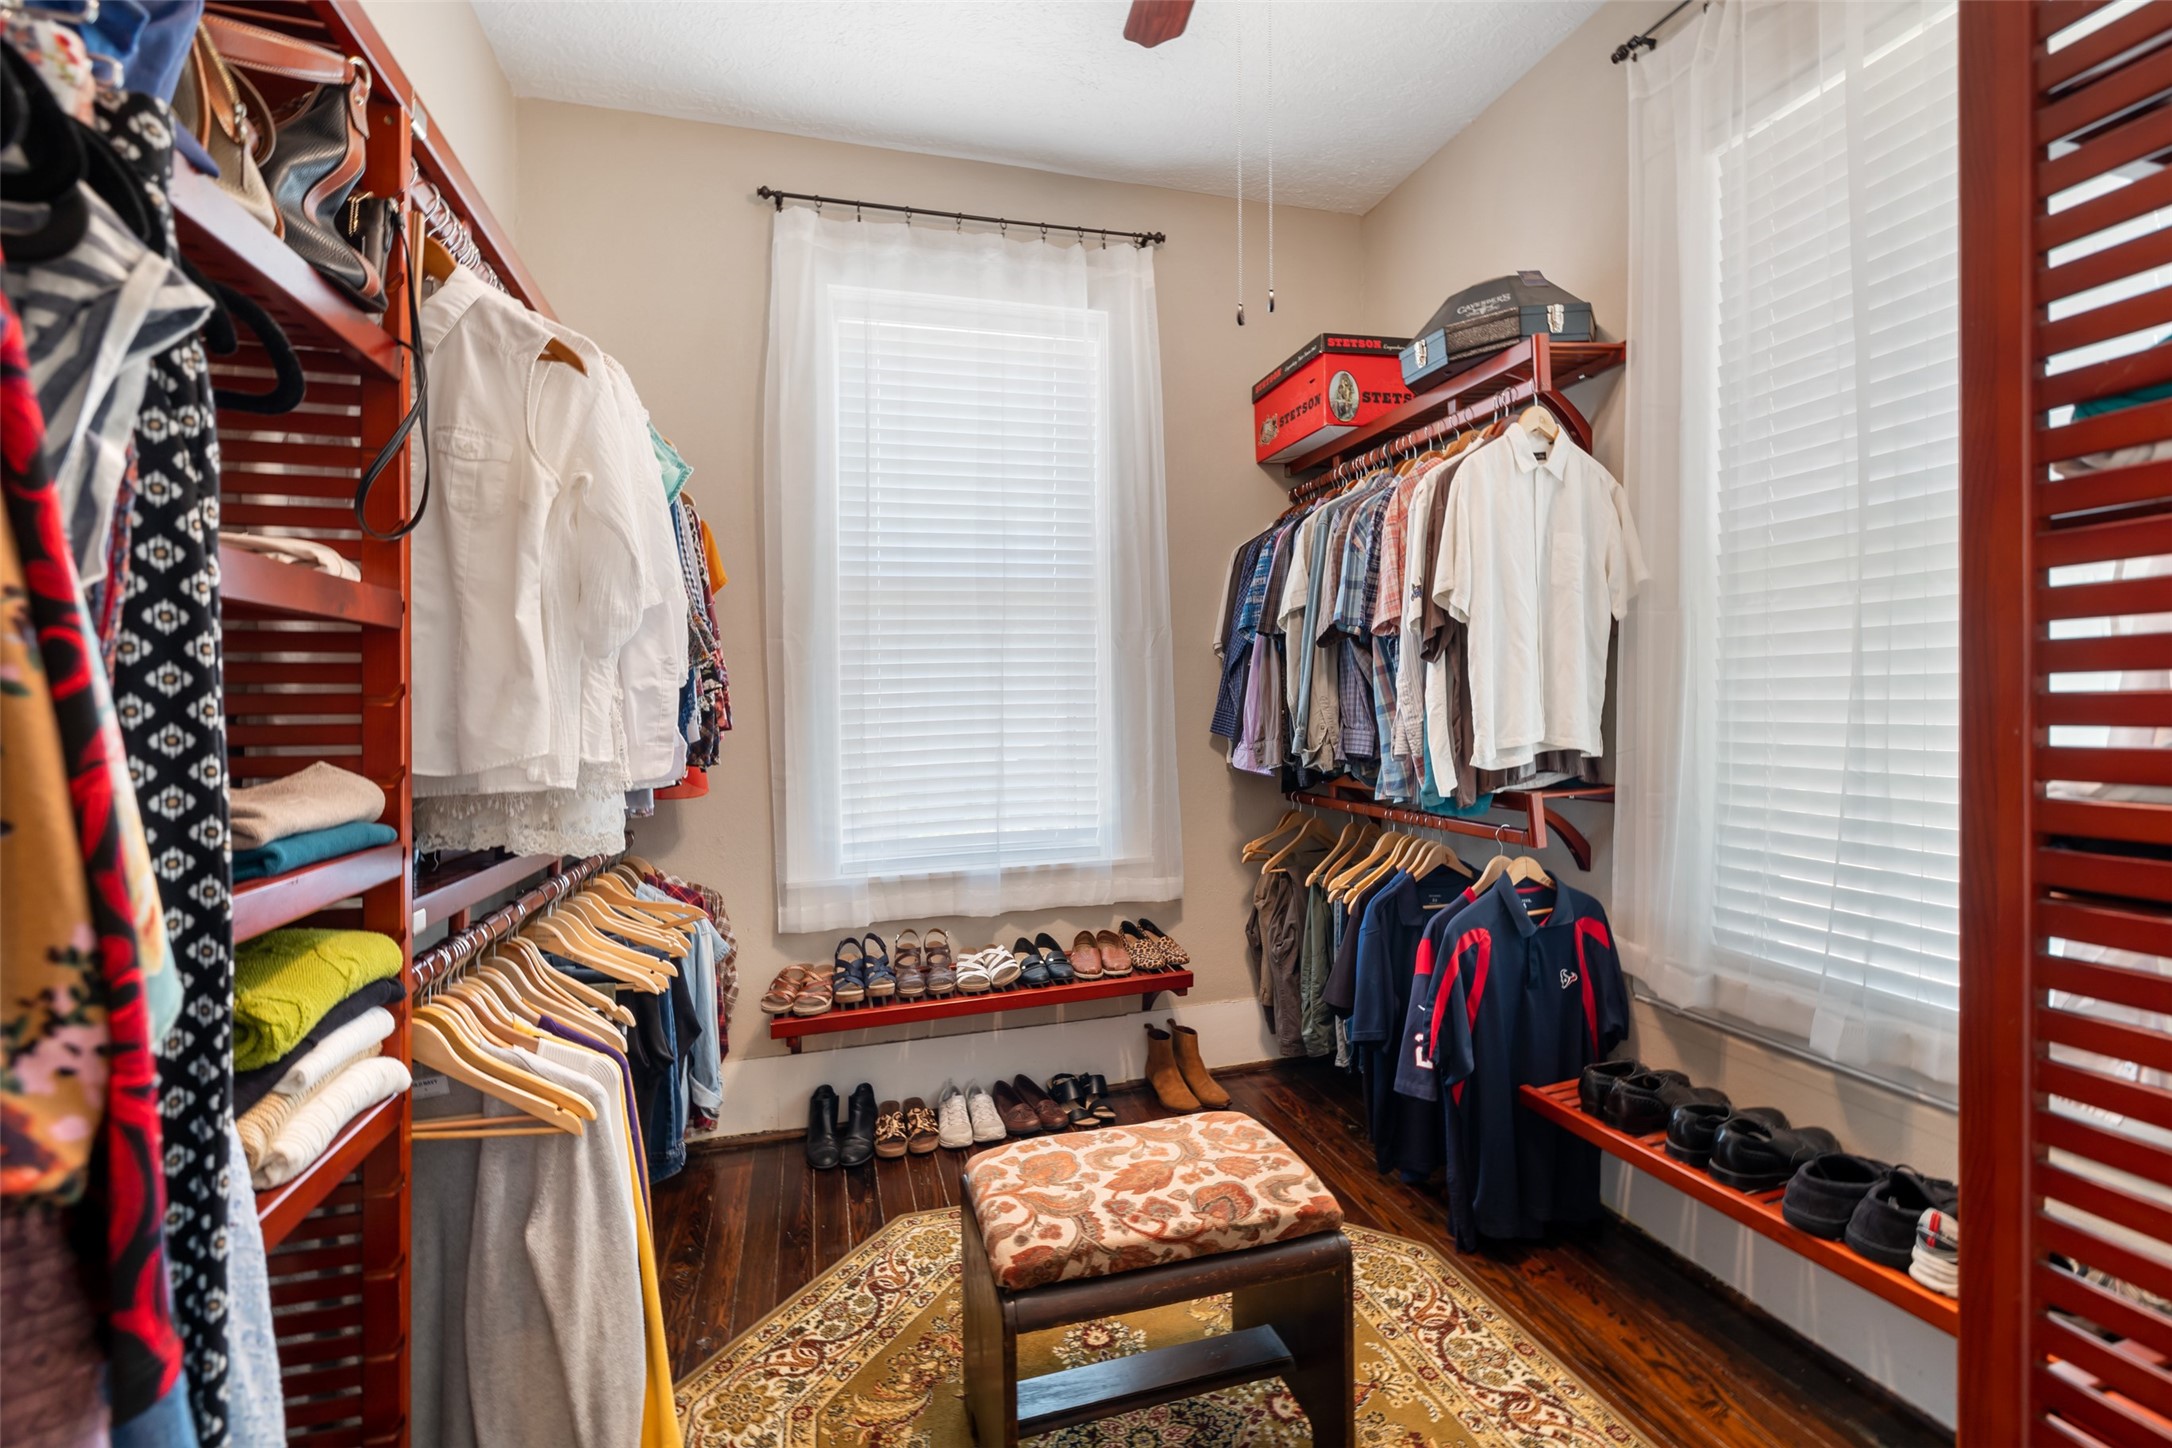 One of the bedrooms is currently being utilized as a LARGE master closet!